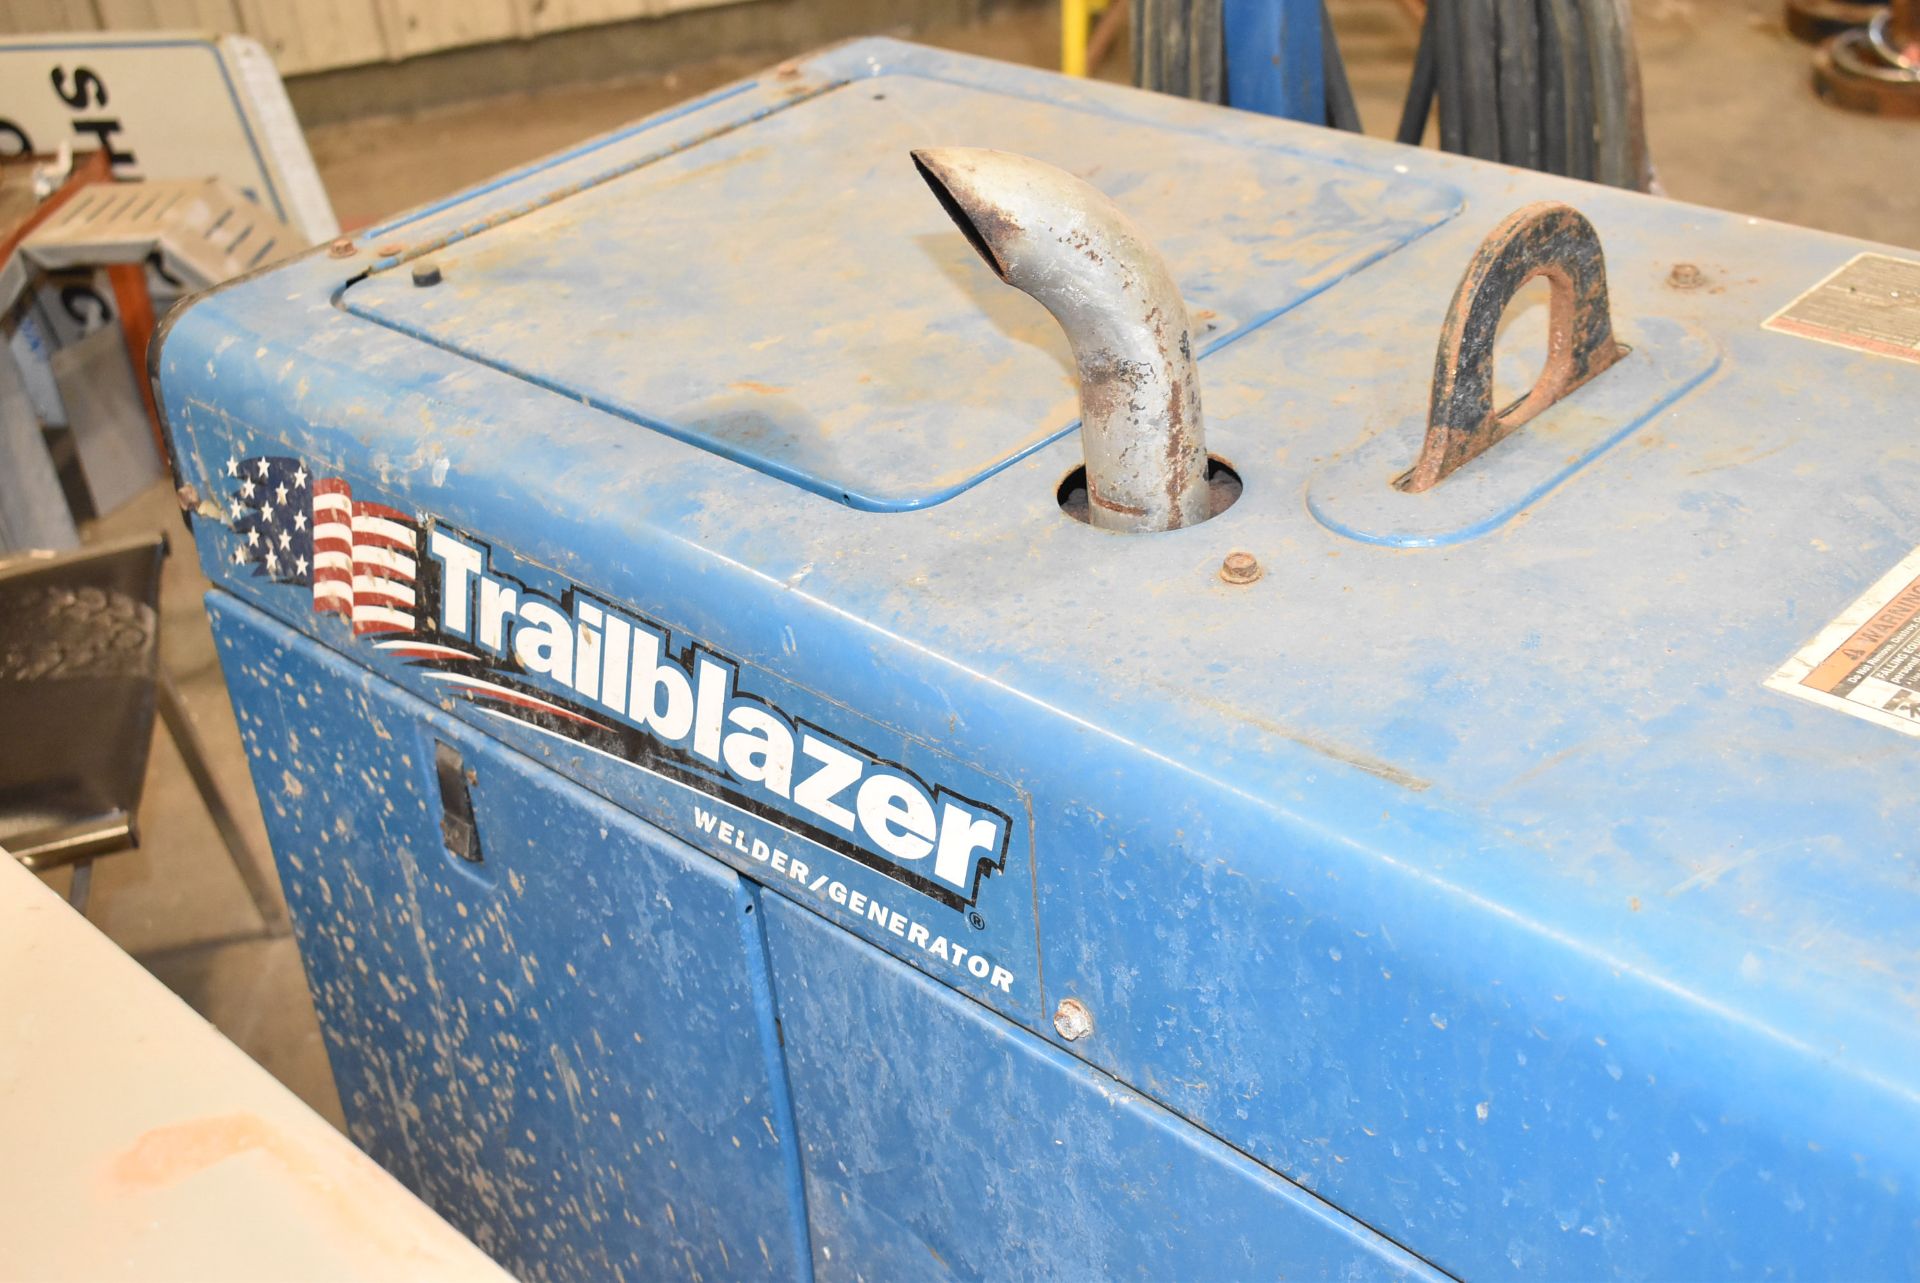 MILLER TRAILBLAZER 302 GAS POWERED CC/CV, AC/DC WELDER WITH 10,500 WATT GENERATOR WITH CABLES AND - Image 3 of 7